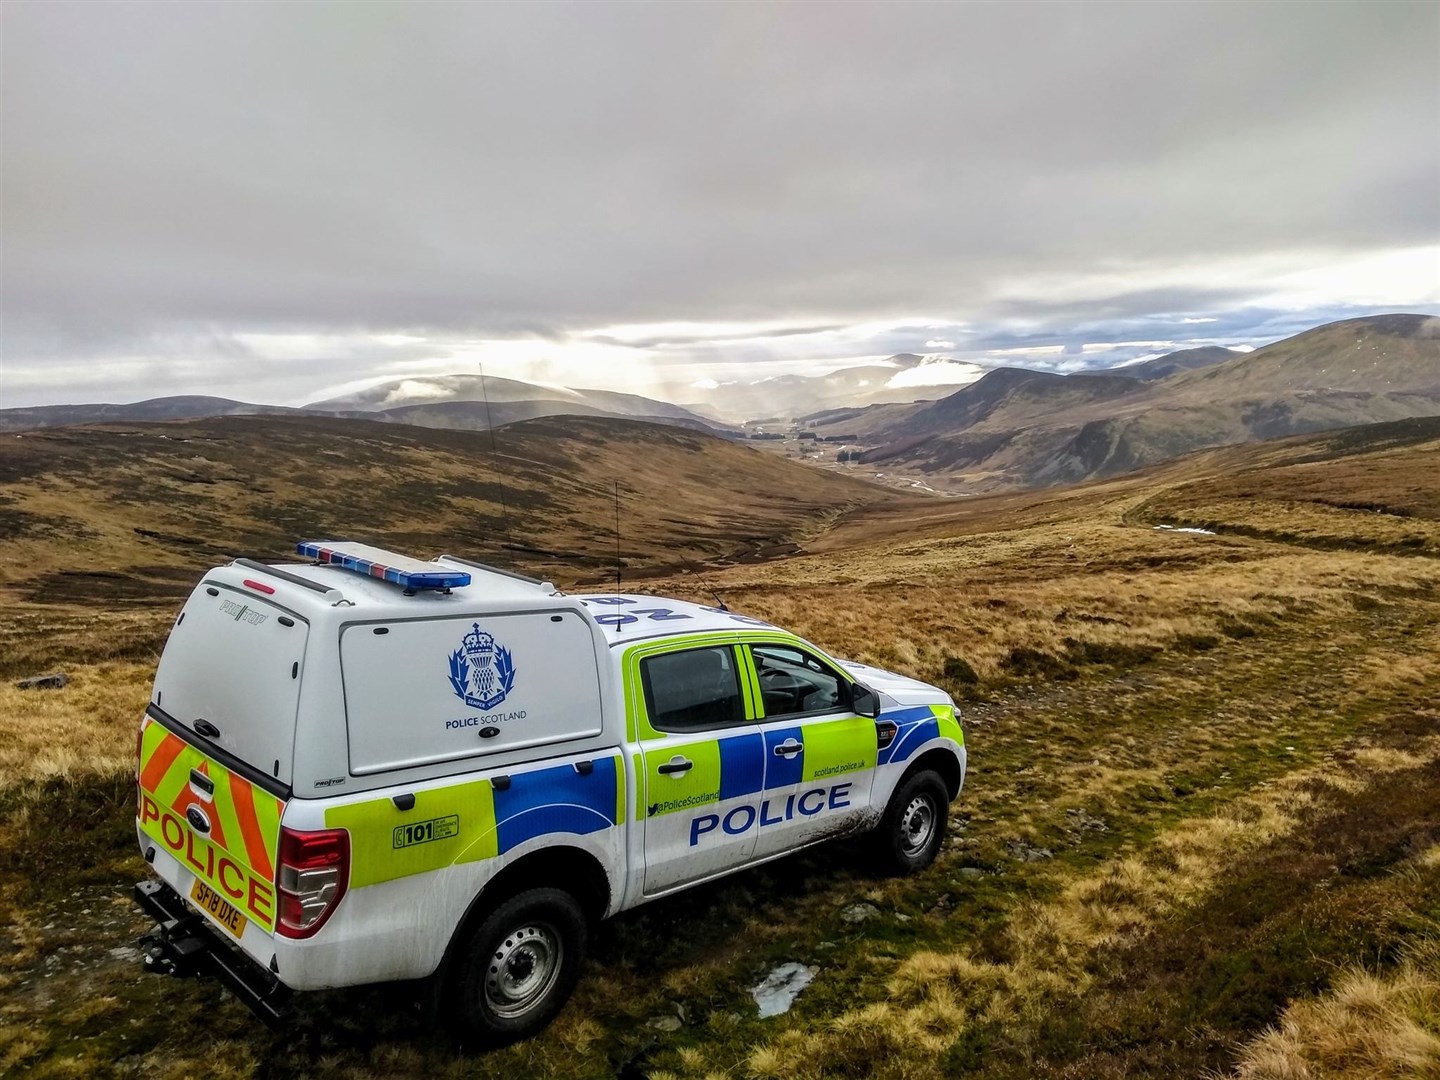 Police are appealing to hill users and mountaineers to plan ahead and take extra care.